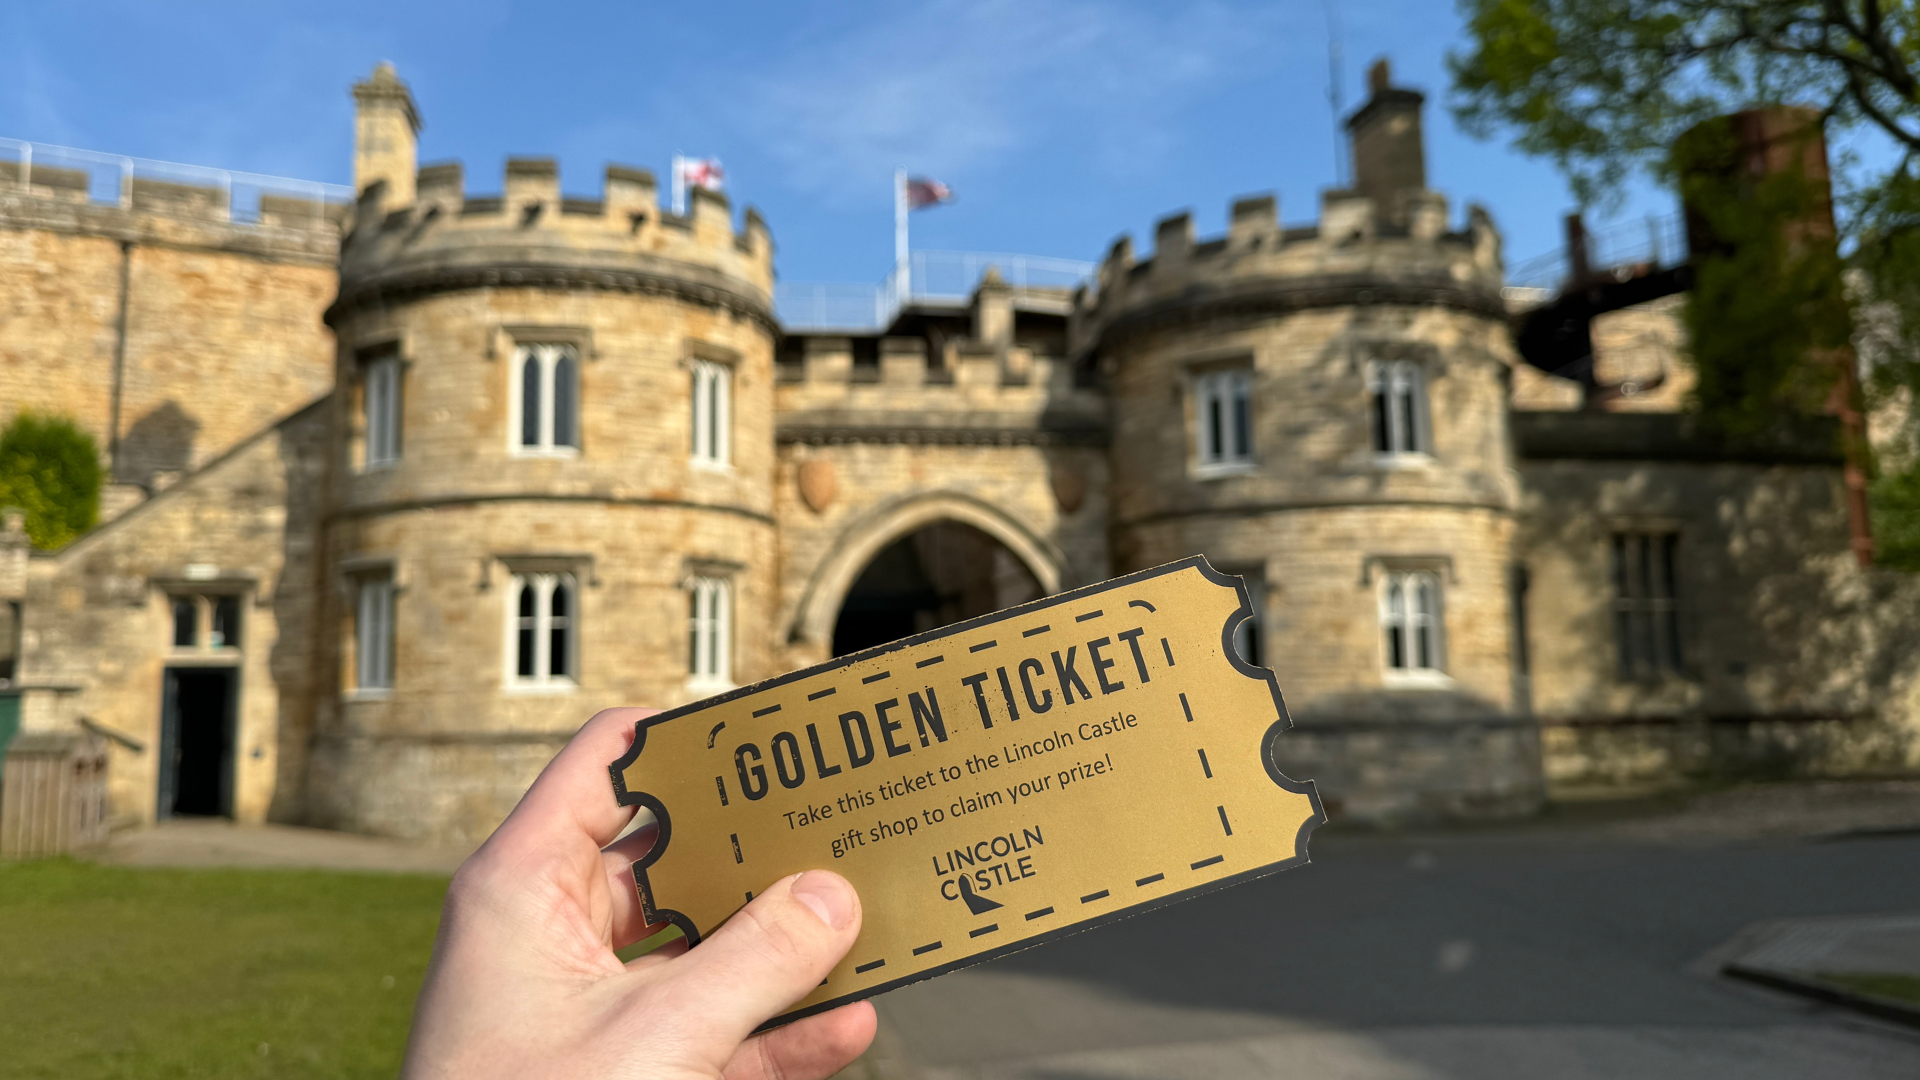 A golden ticket being held in front of the Eastgate at Lincoln Castle